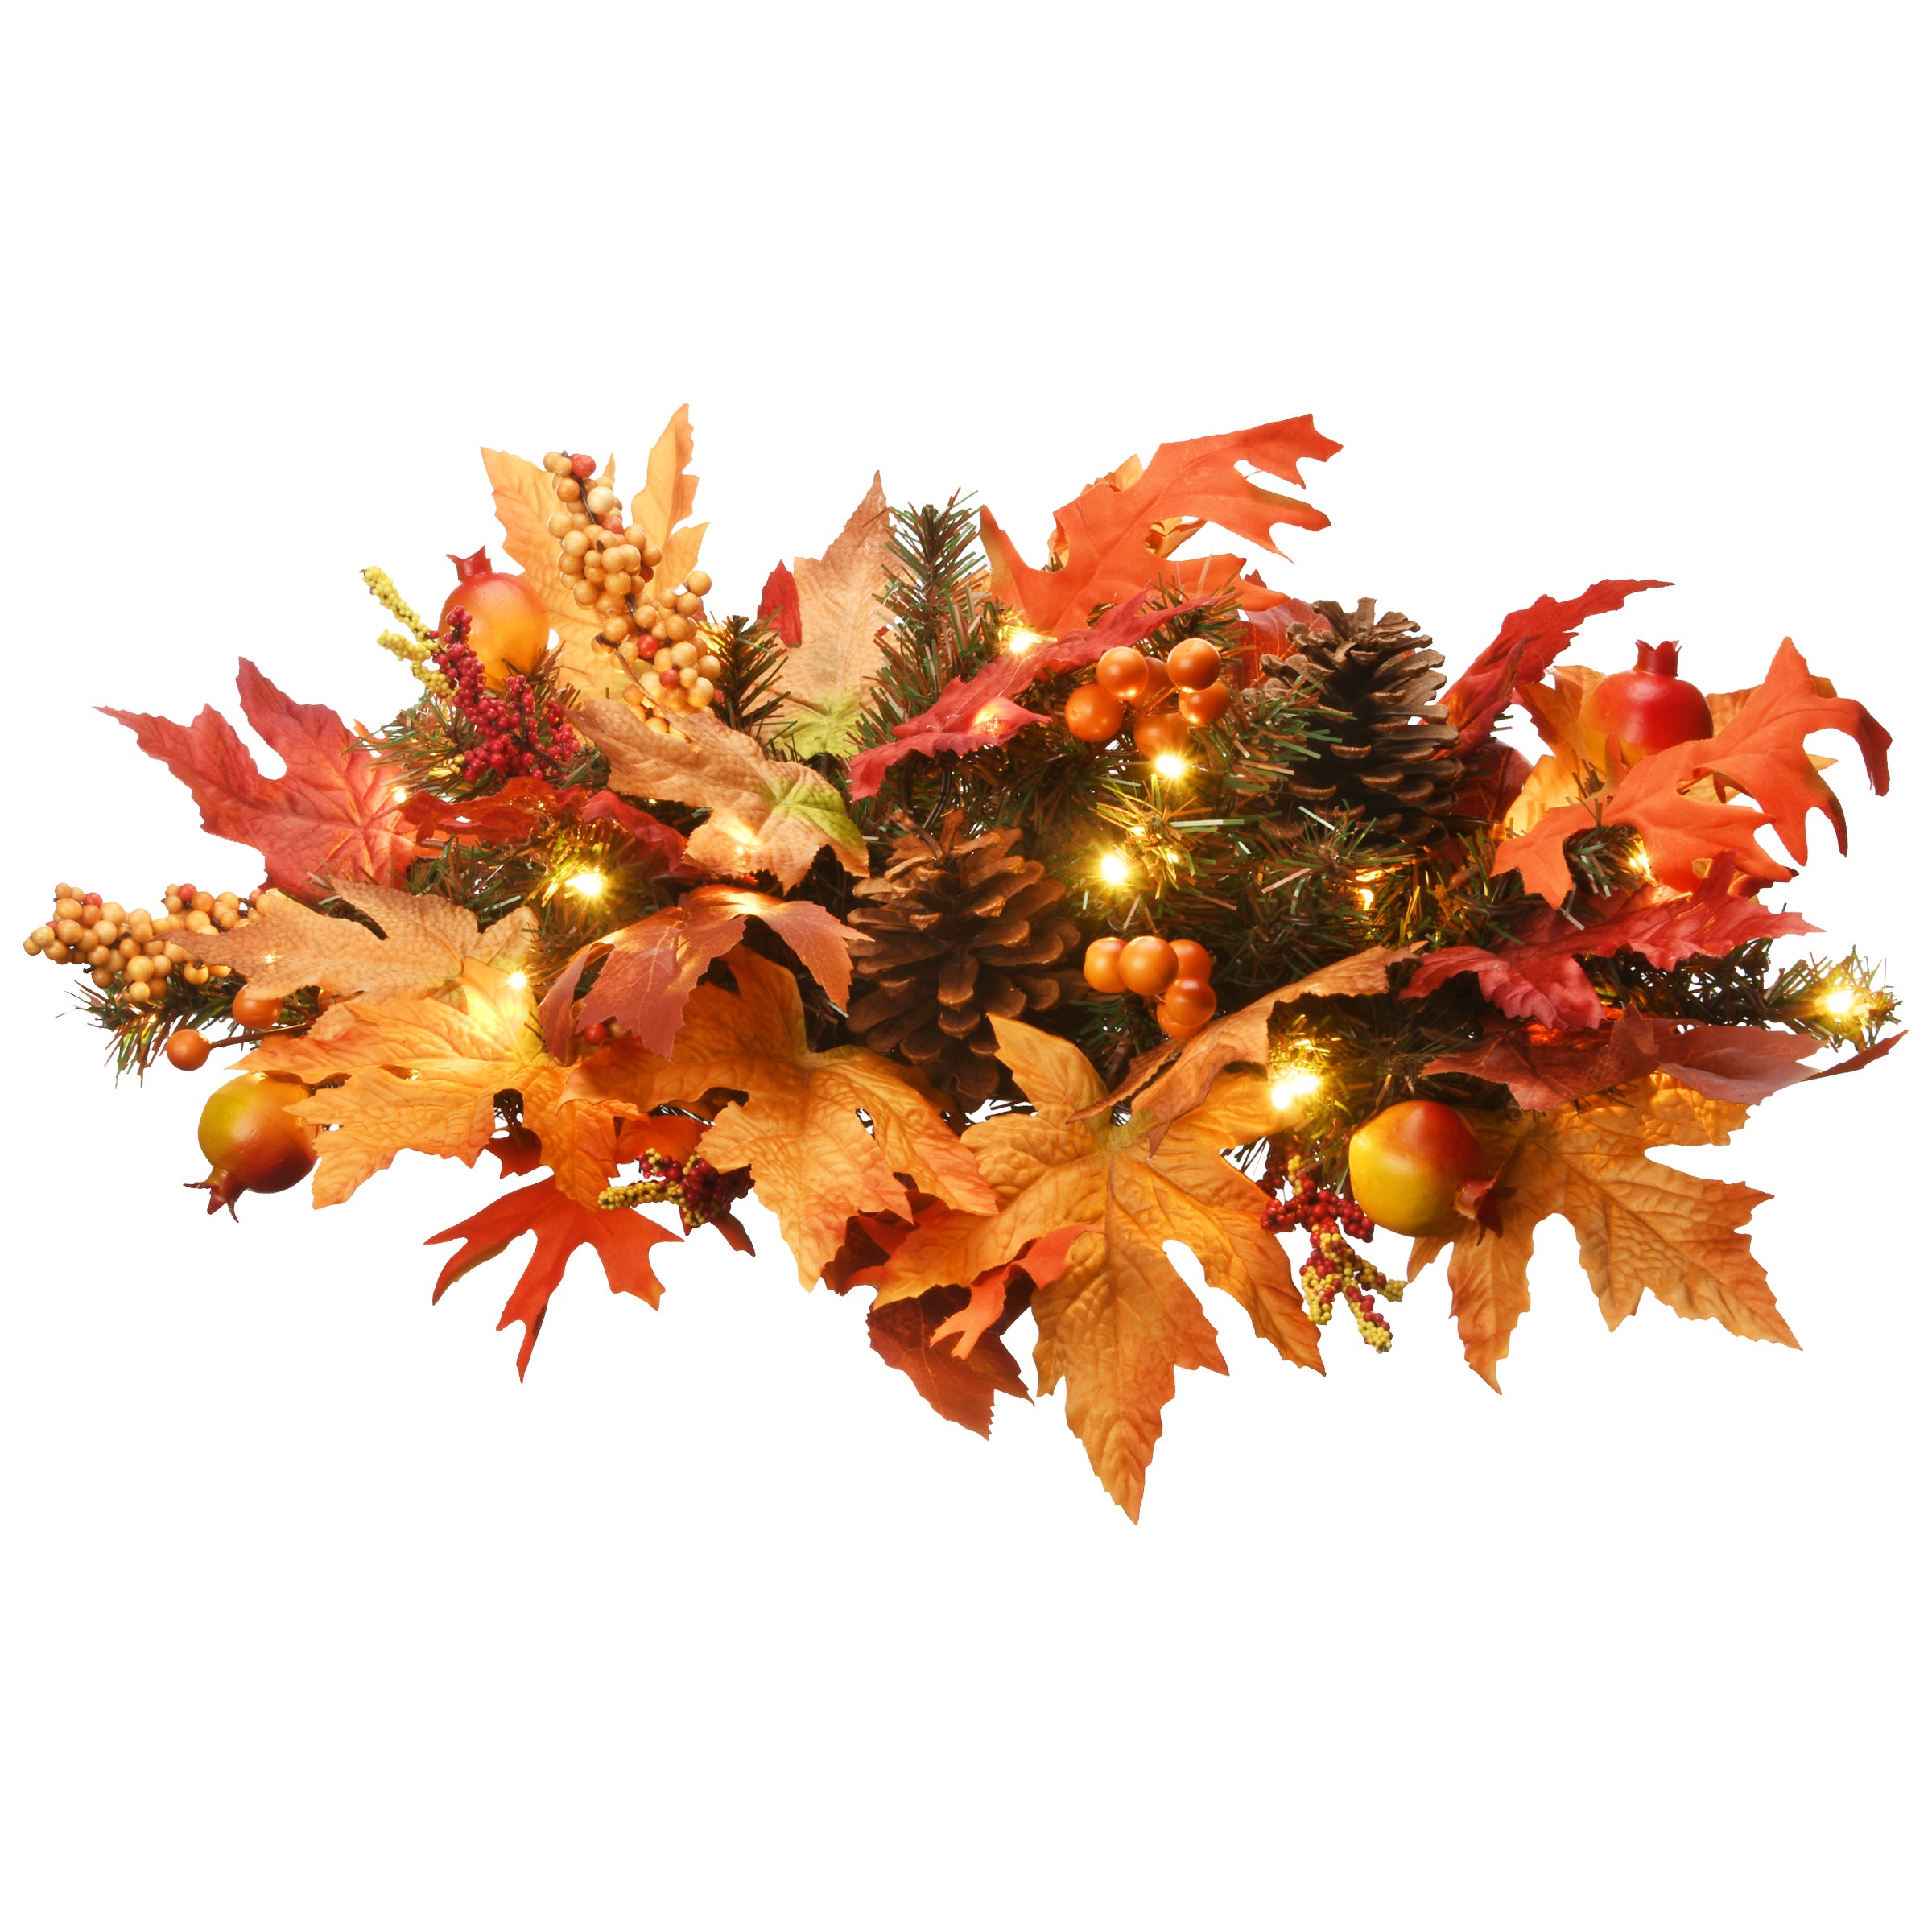 National Tree Company Artificial Pre-Lit Fall Centerpiece, Decorated with Pinecones, Fruit, Berry Clusters, Maple Leaves, LED Lights, Autumn Collection, 24 in